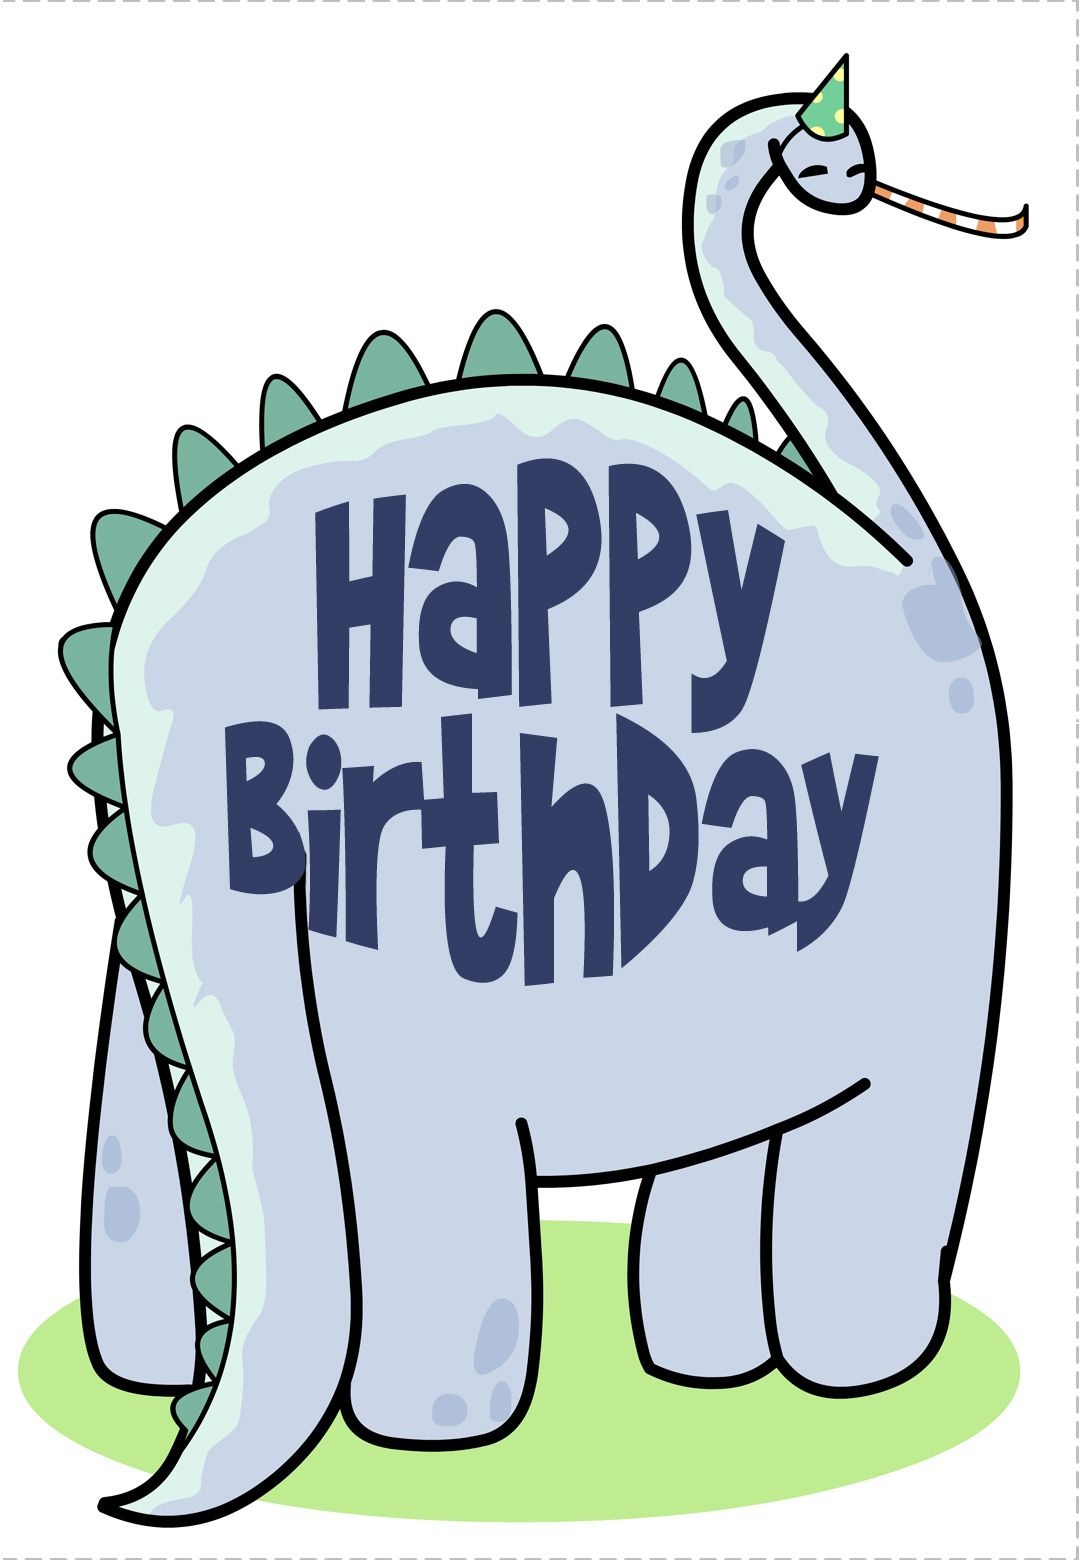 Free Printable Dinosaur Greeting Card. This Website Awesome For - Free Printable Money Cards For Birthdays